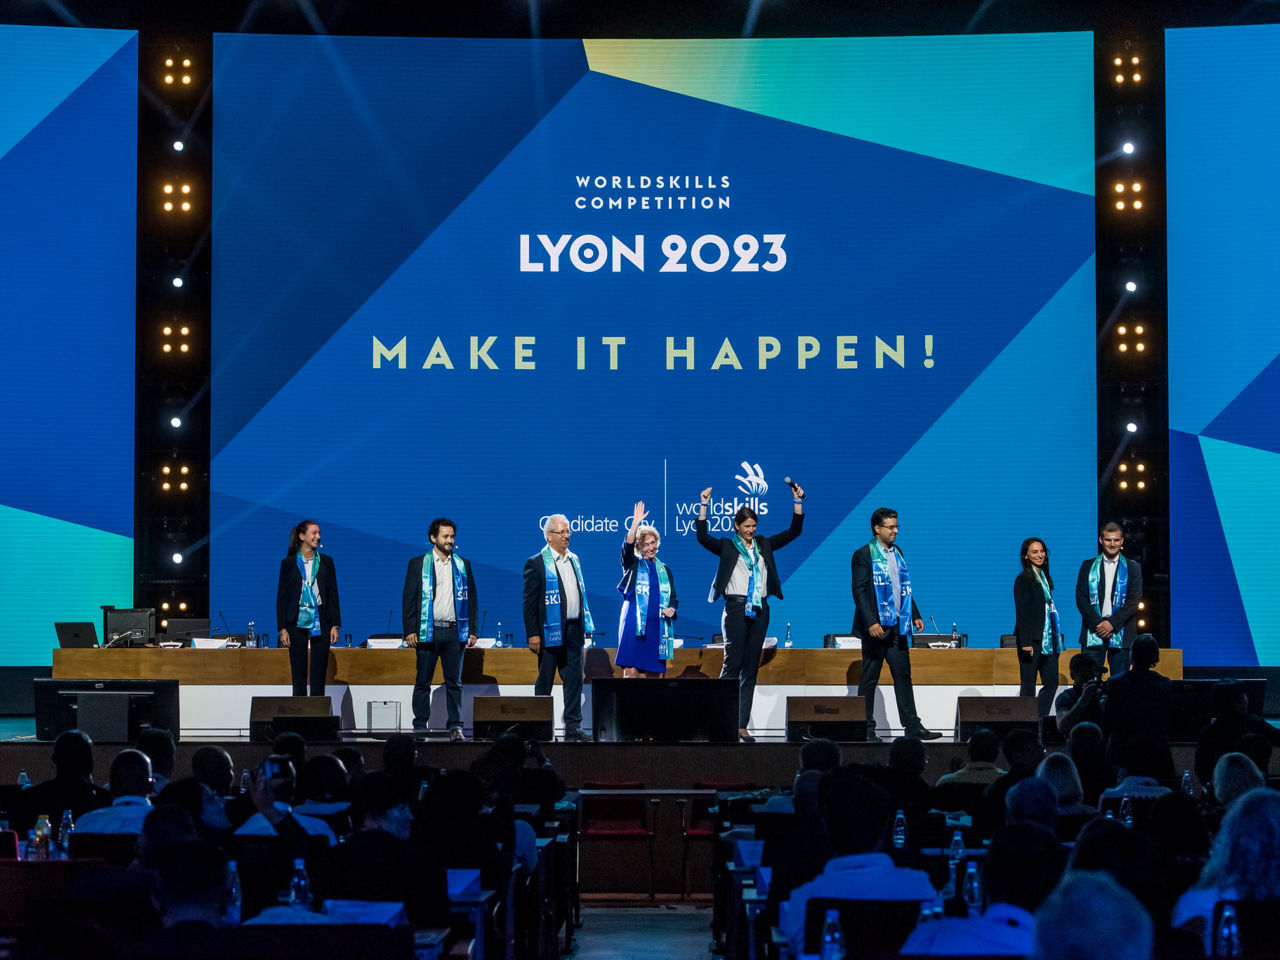 Lyon to host the 47th WorldSkills Competition in 2023